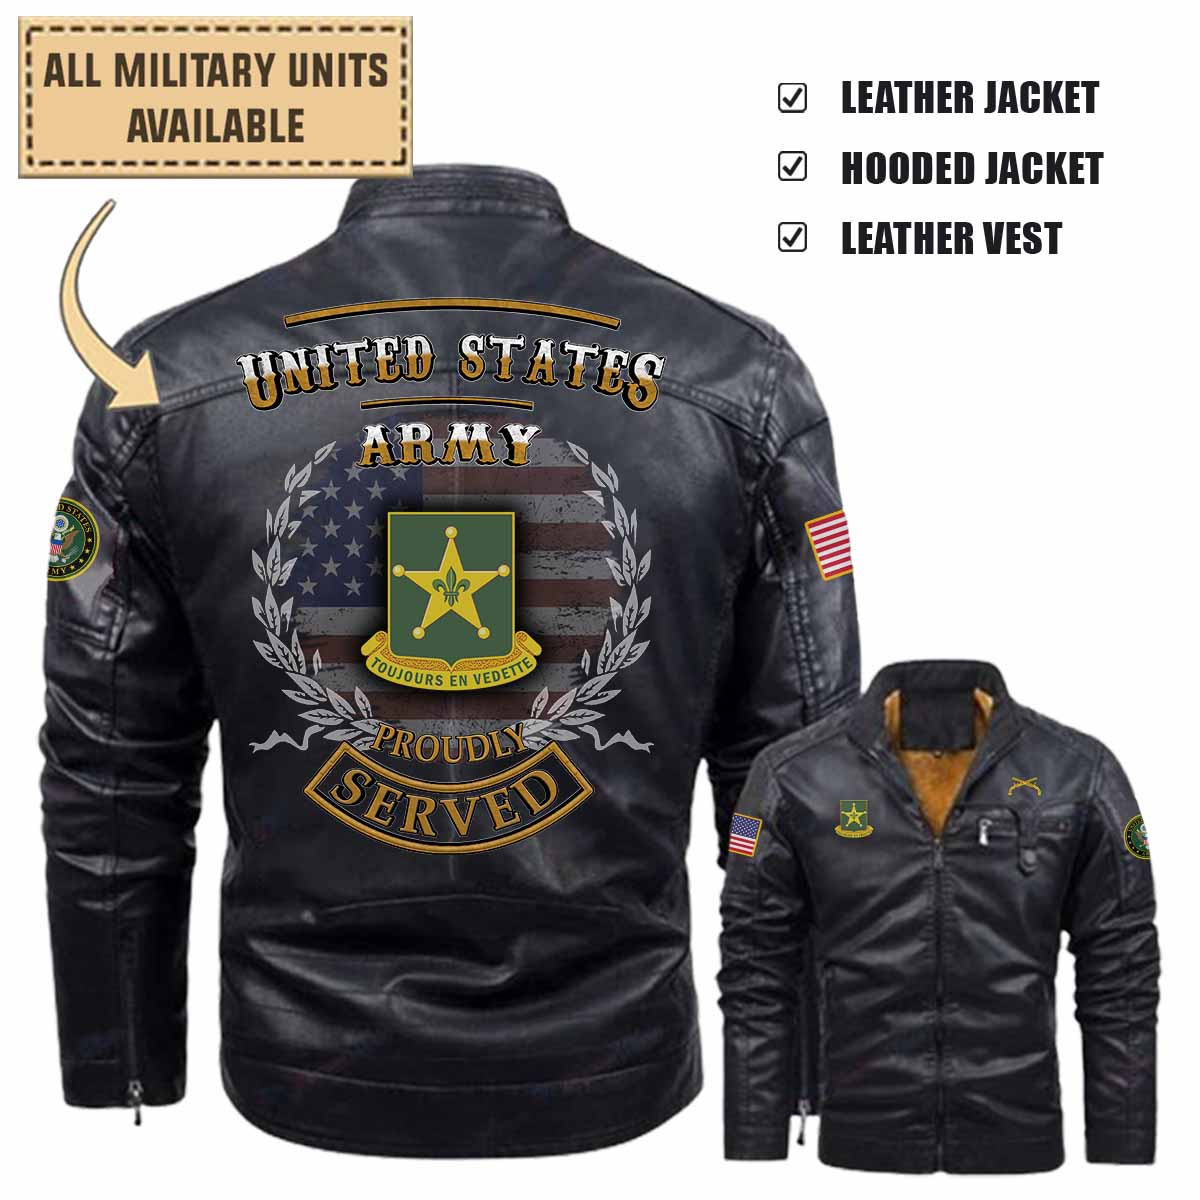 387th MP BN 387th Military Police Battalion_Military Leather Jacket and Vest